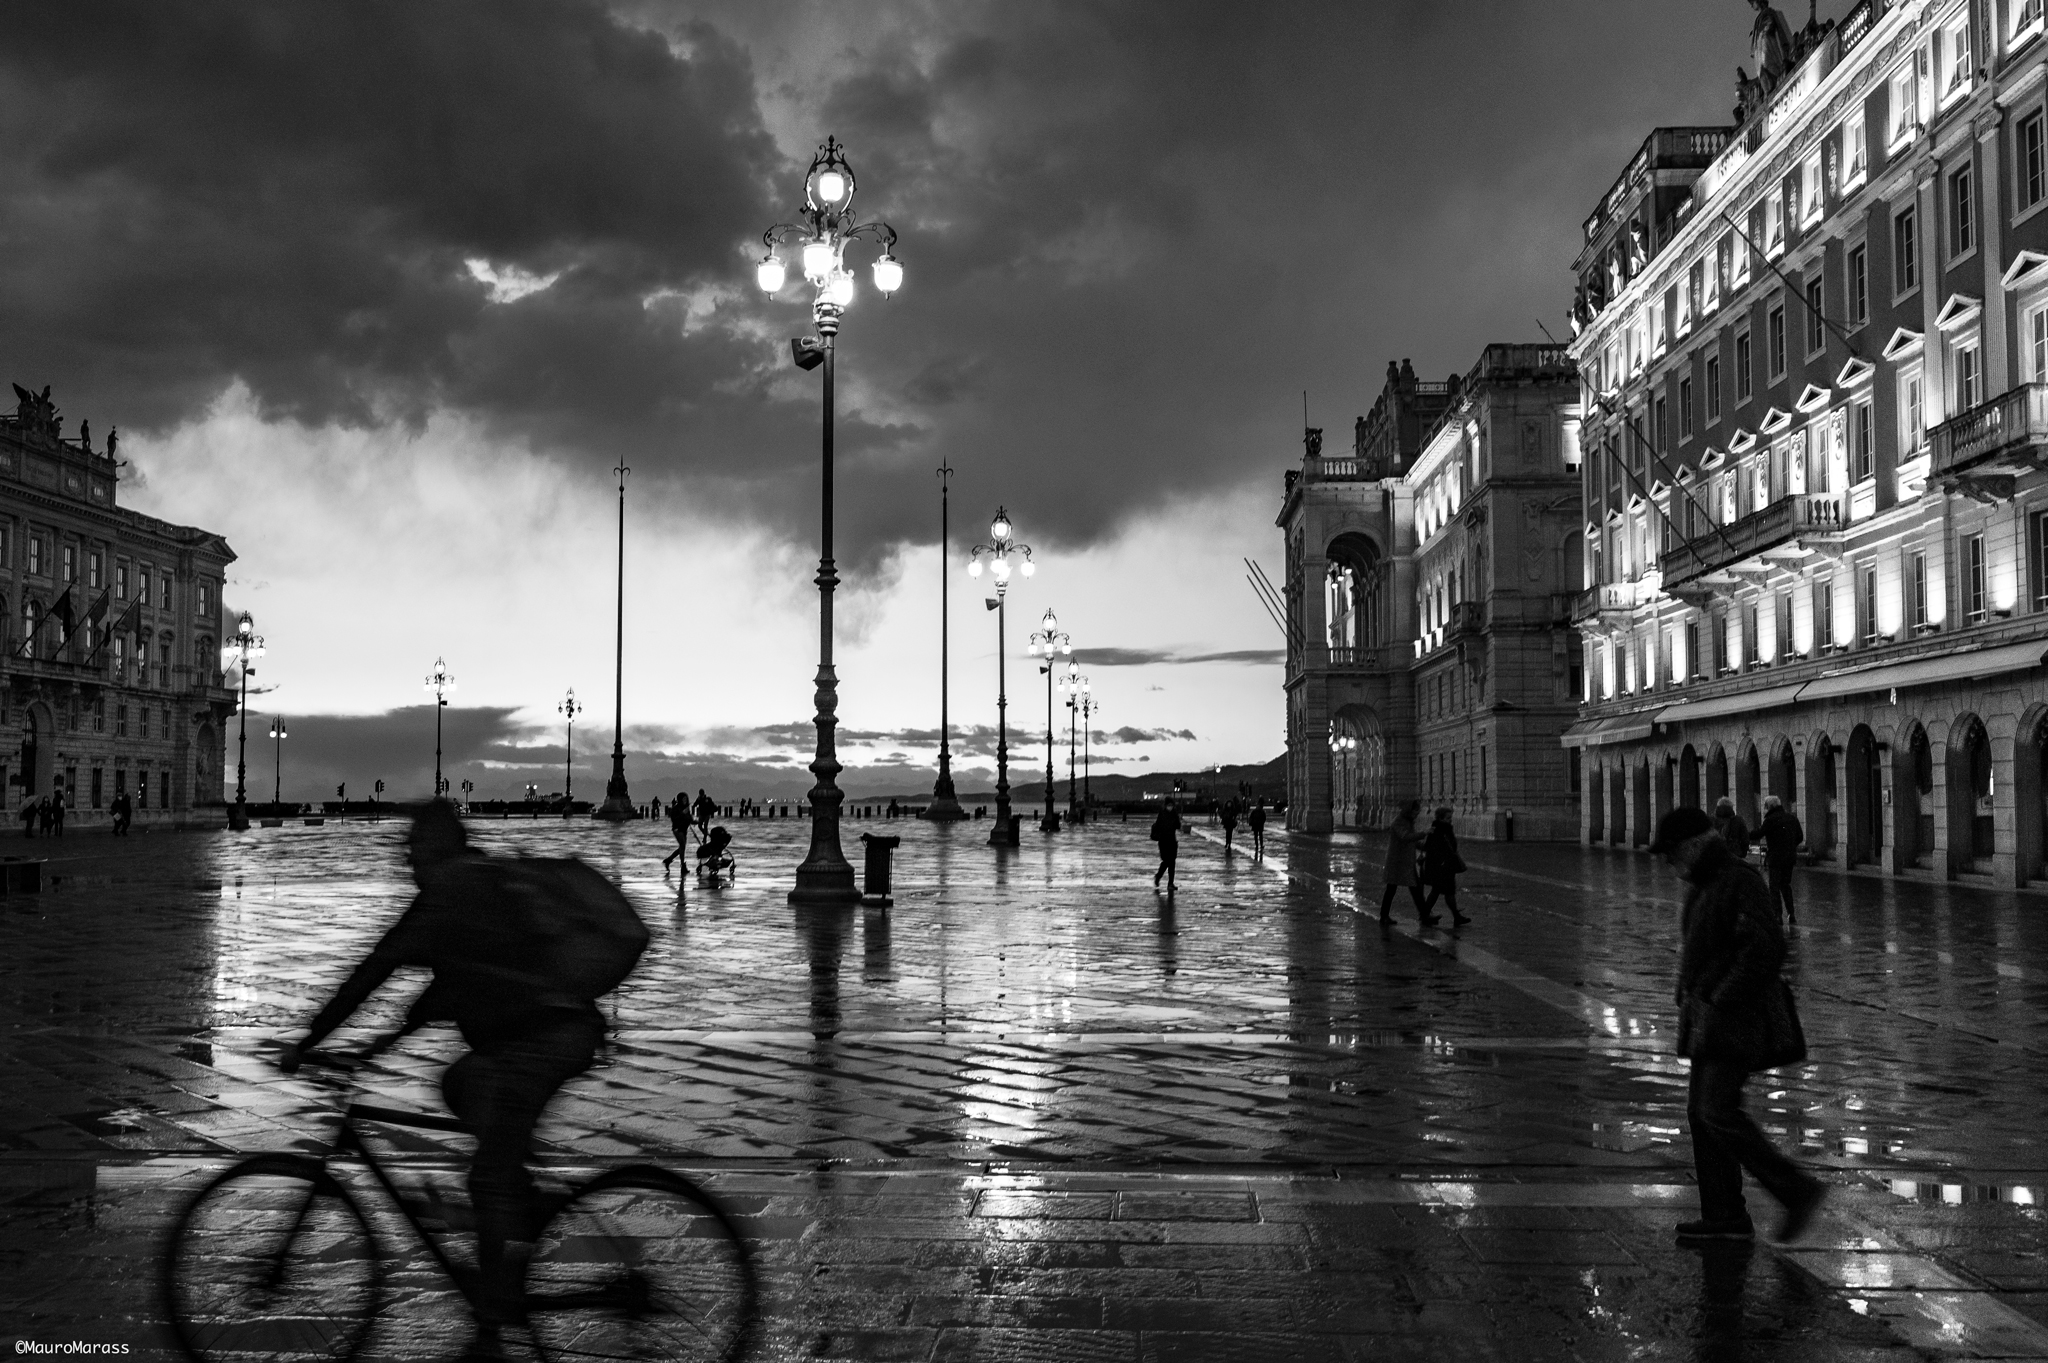 Trieste after the rain...